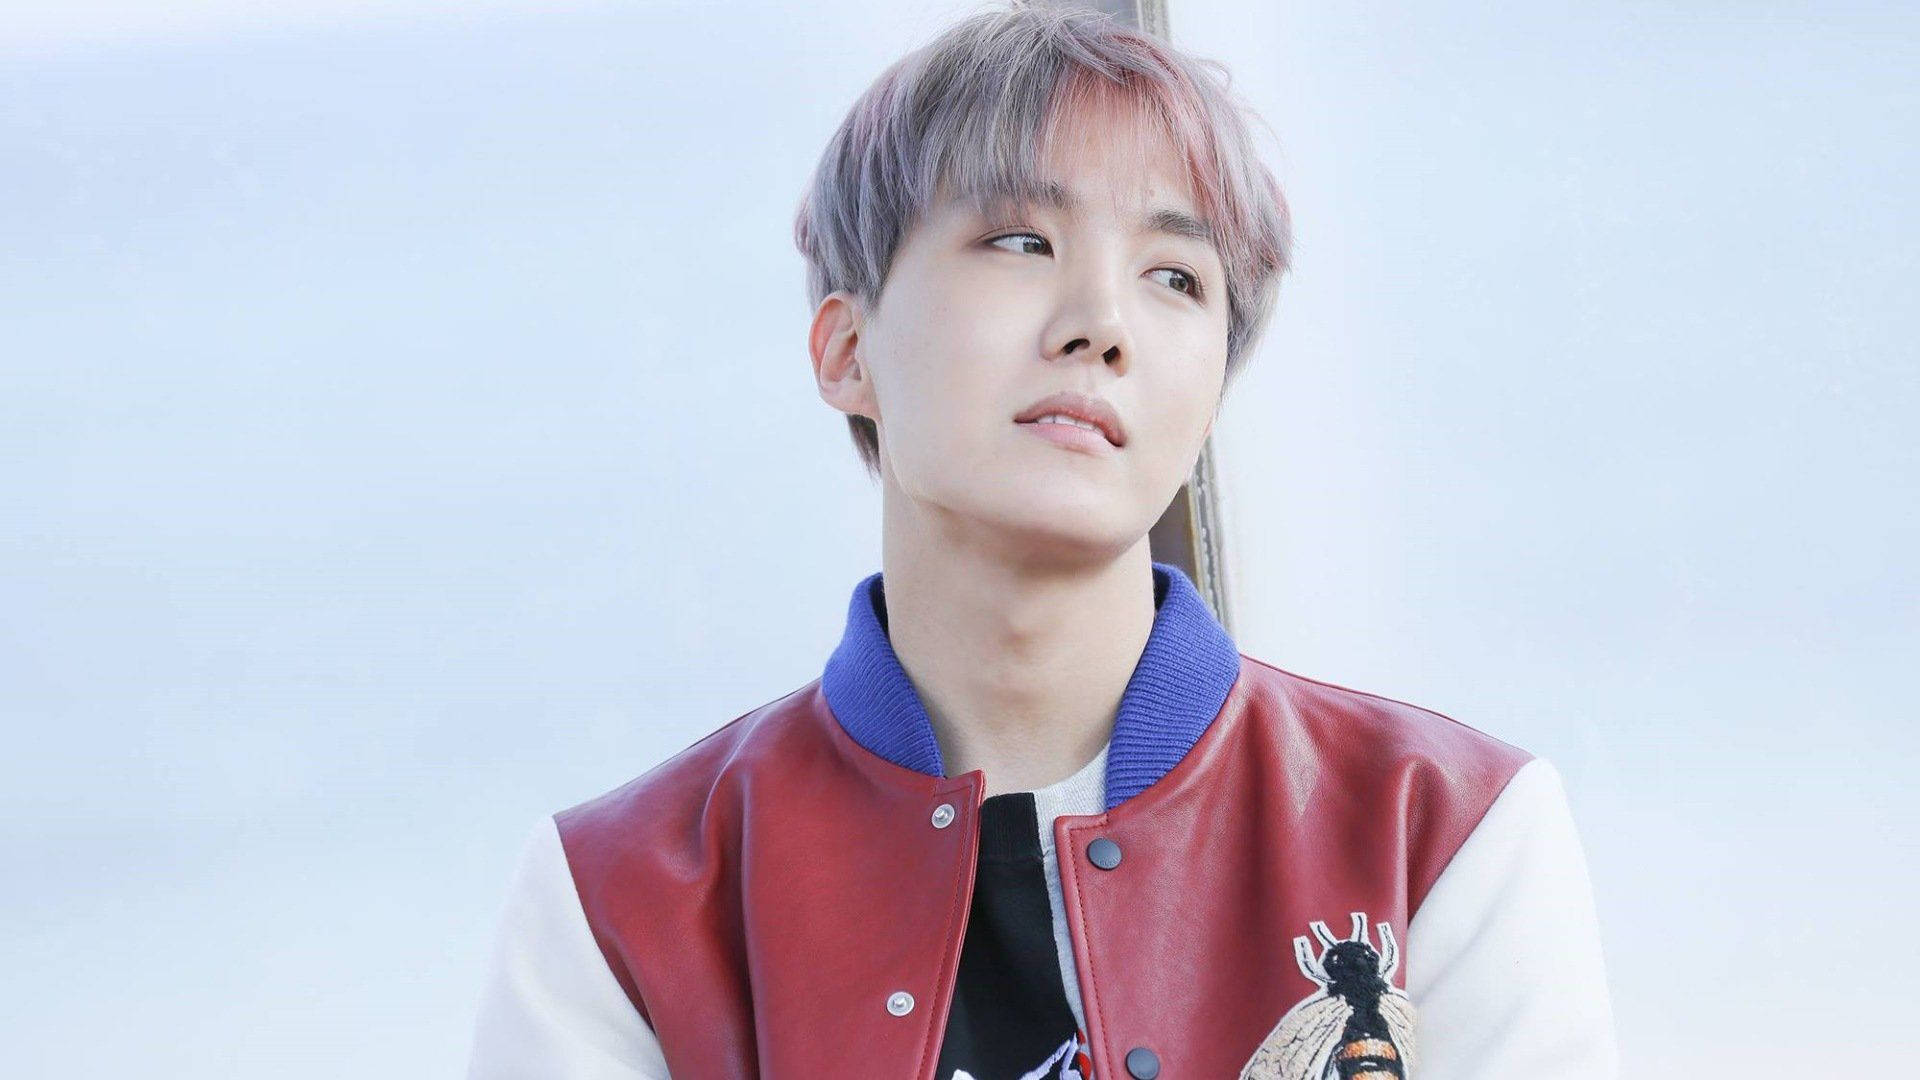 Cute Bts J-hope With Red And White Jacket